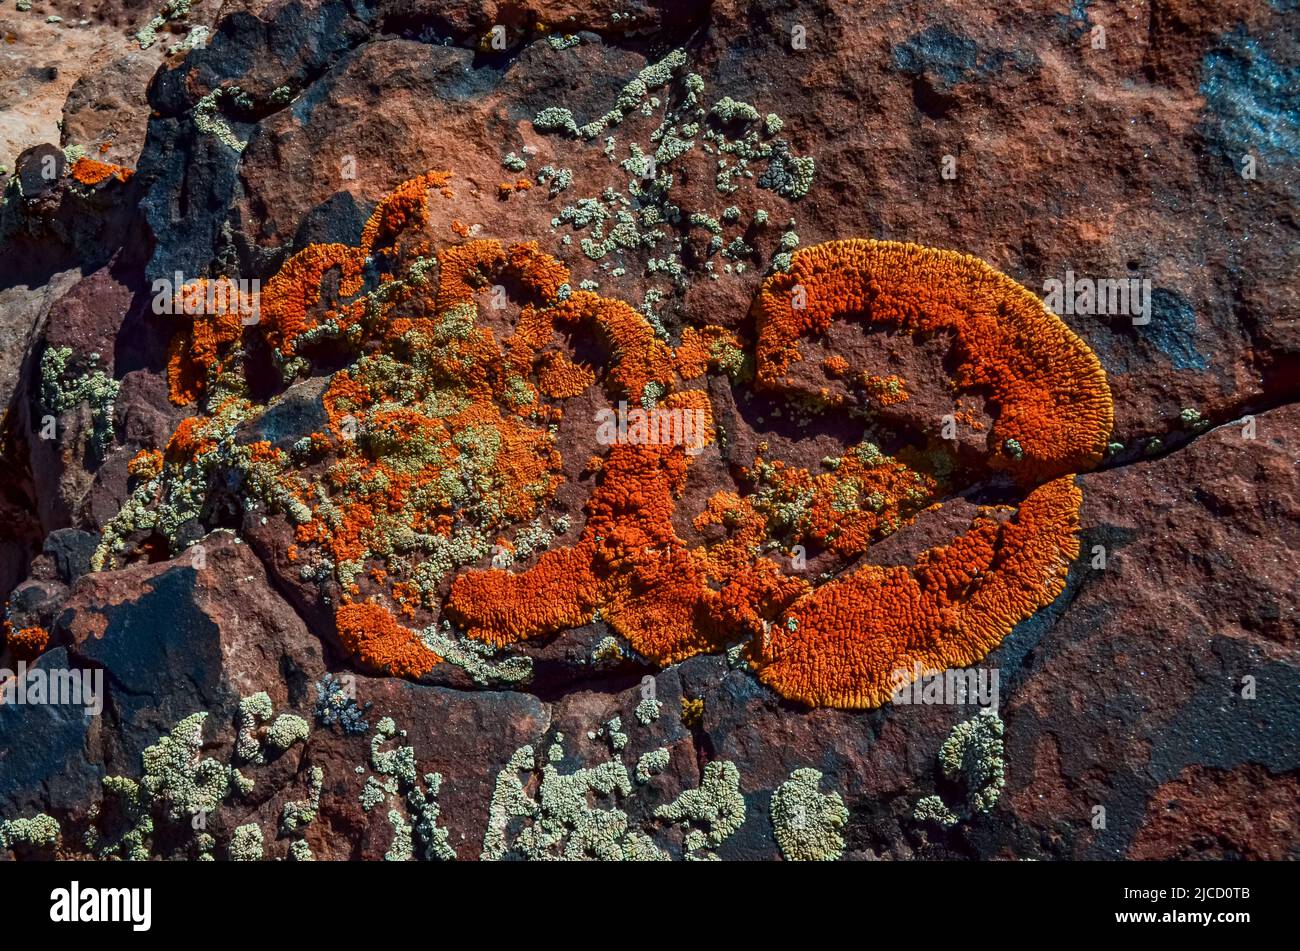 Red and green lichens on red eroded rocks in Canyonlands NP is in Utah near Moab. USA Stock Photo